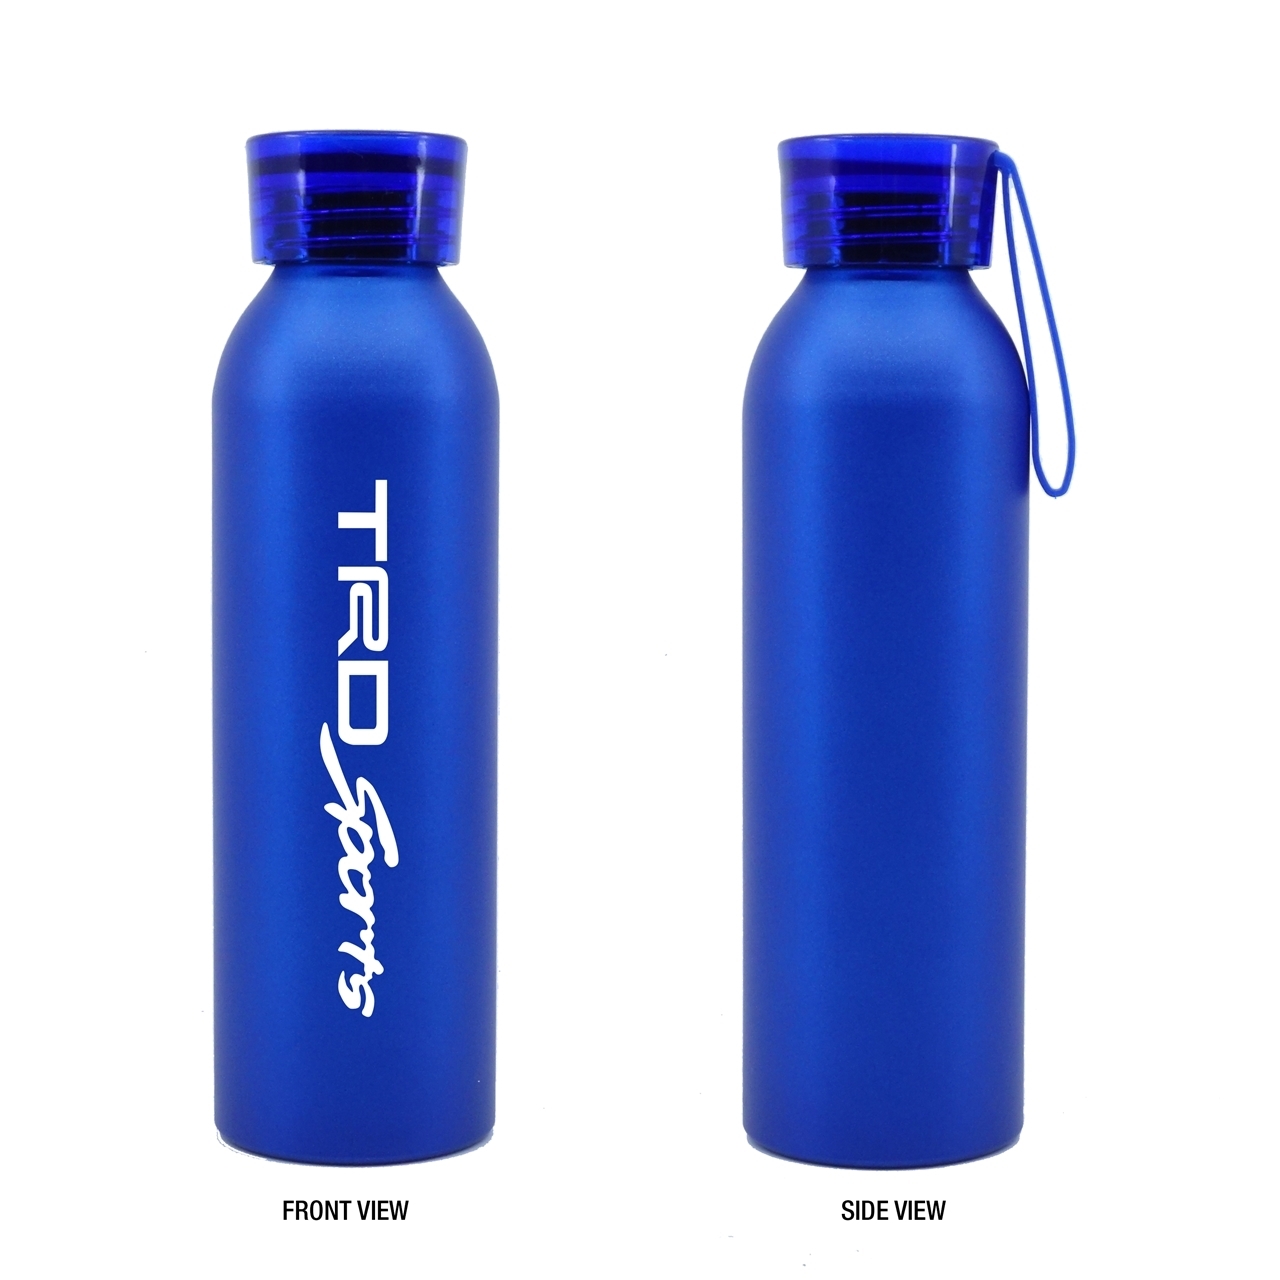 https://www.withlogos.com/content/images/thumbs/0041774_custom-20-oz-aluminum-bottle-with-silicone-carrying-strap.jpeg